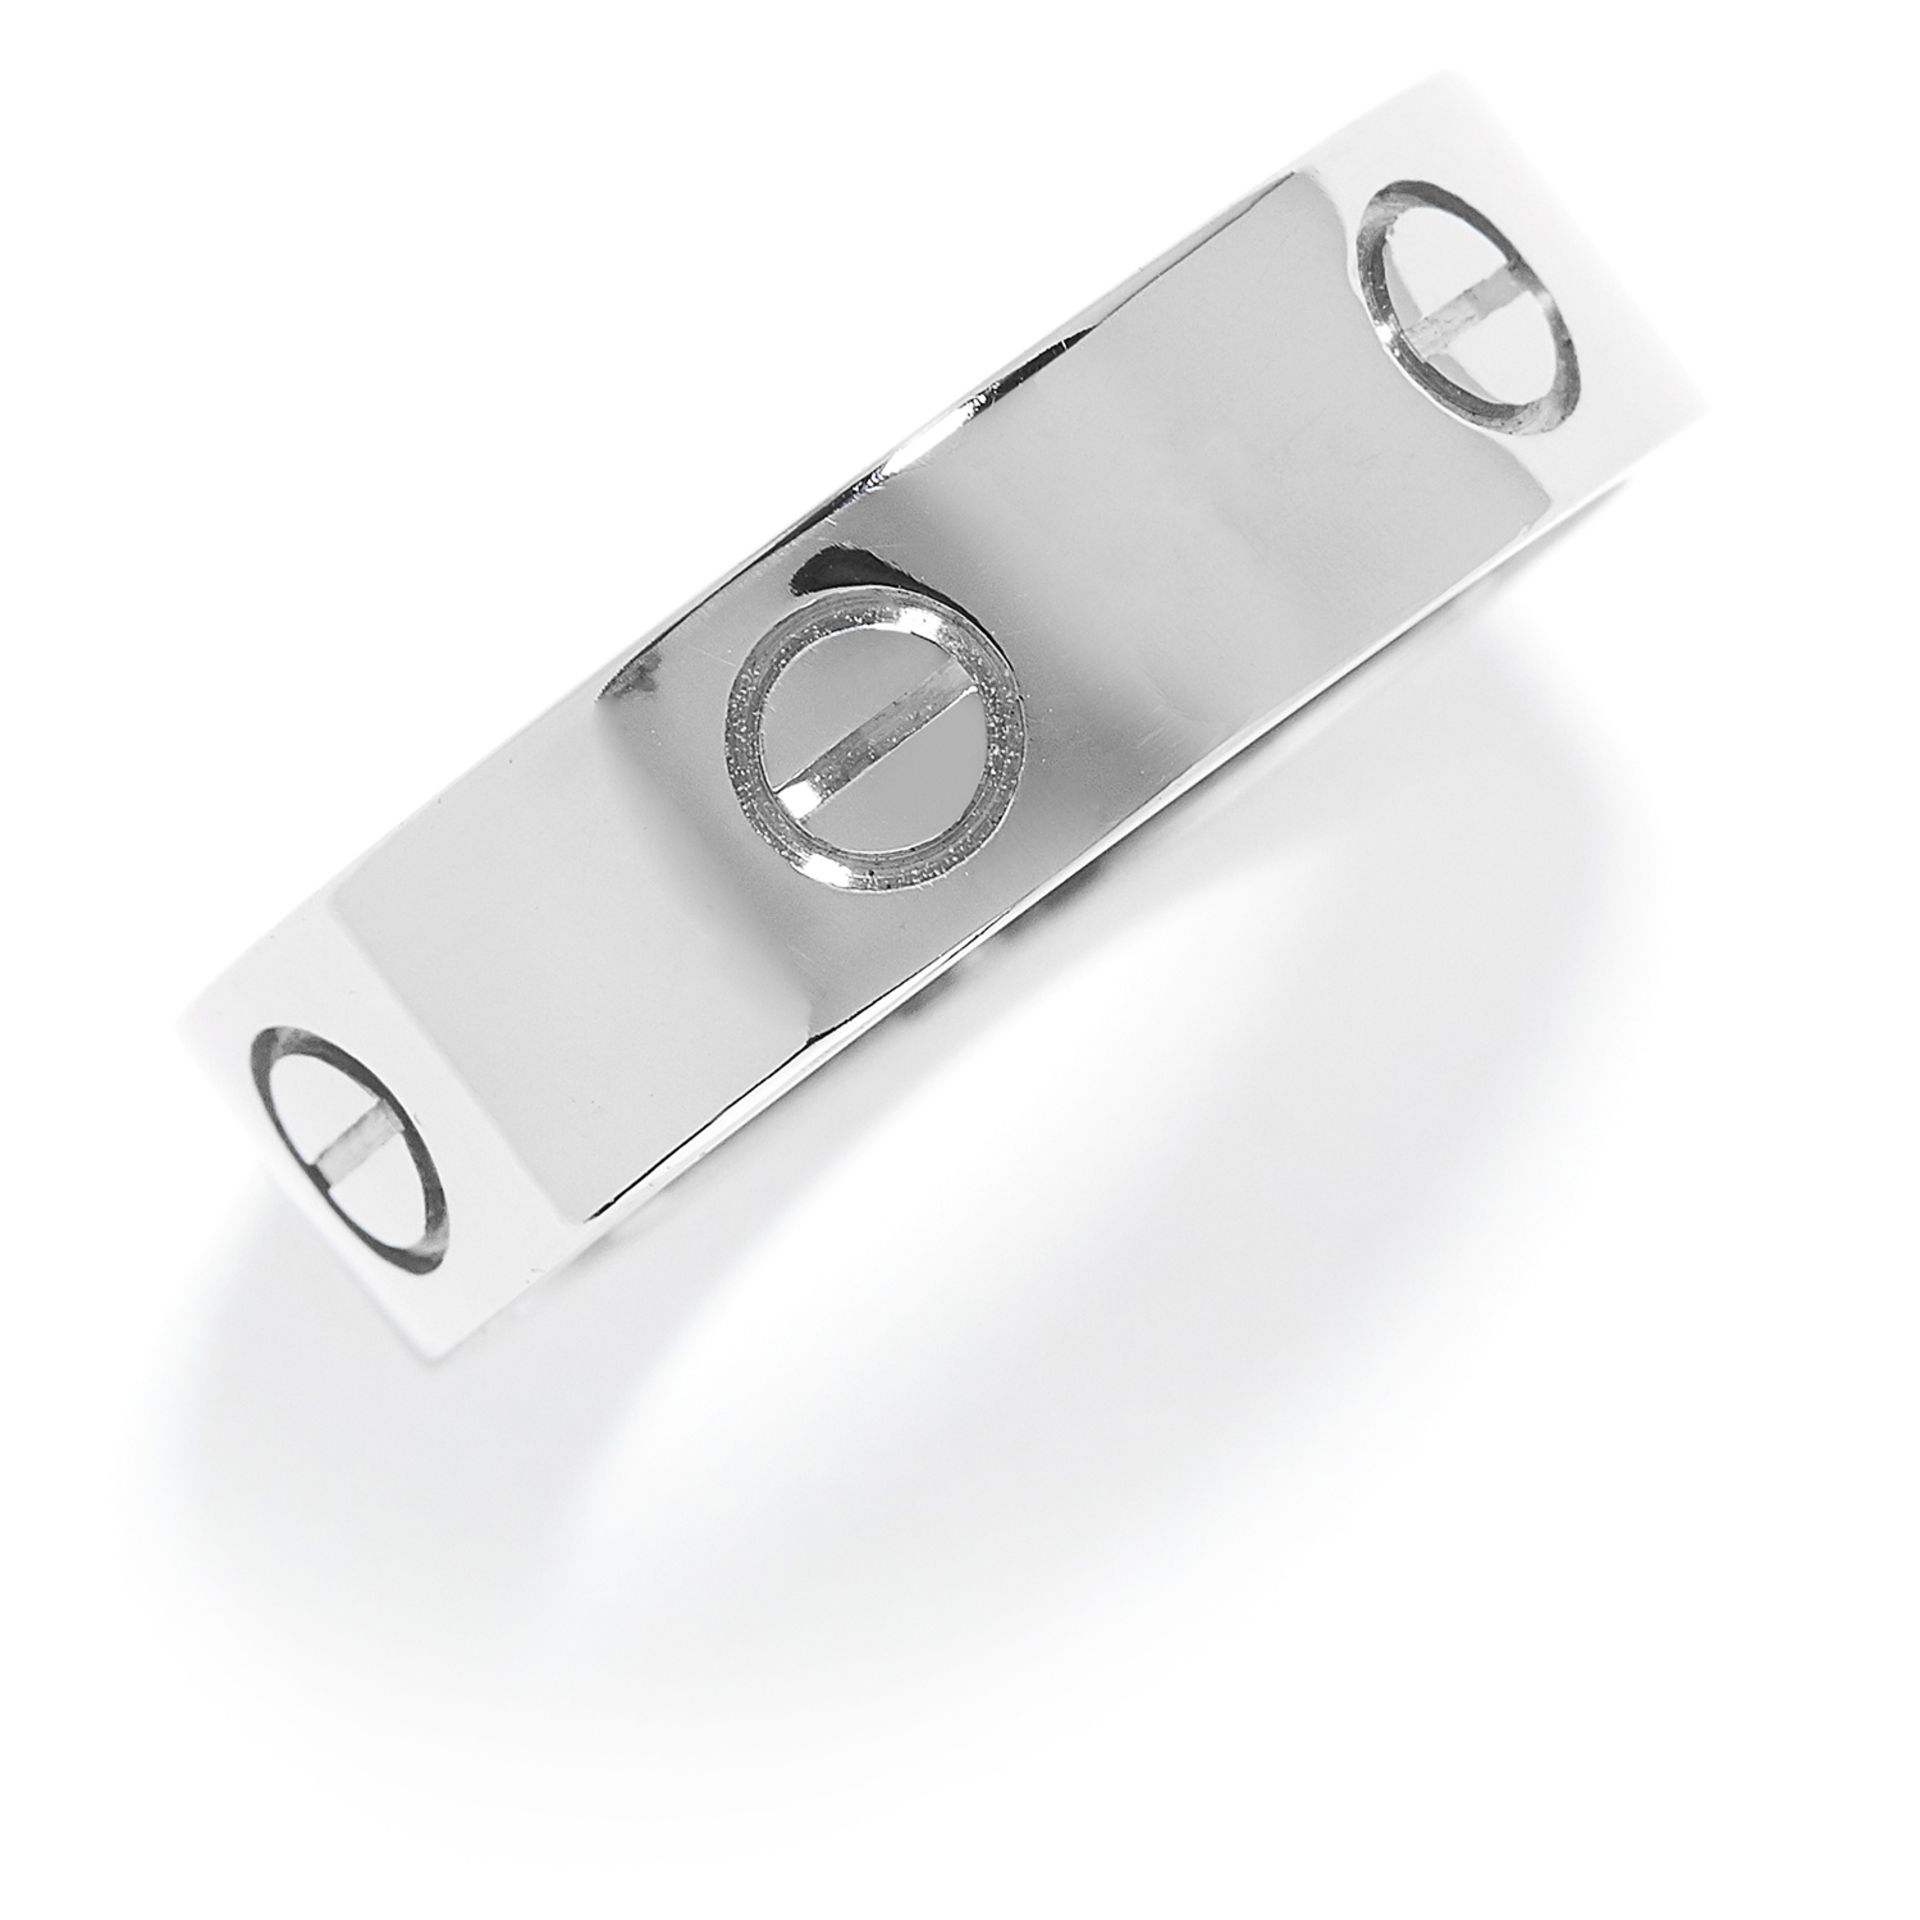 LOVE RING, CARTIER in 18ct white gold, the band with screw head motifs, signed Cartier and numbered,